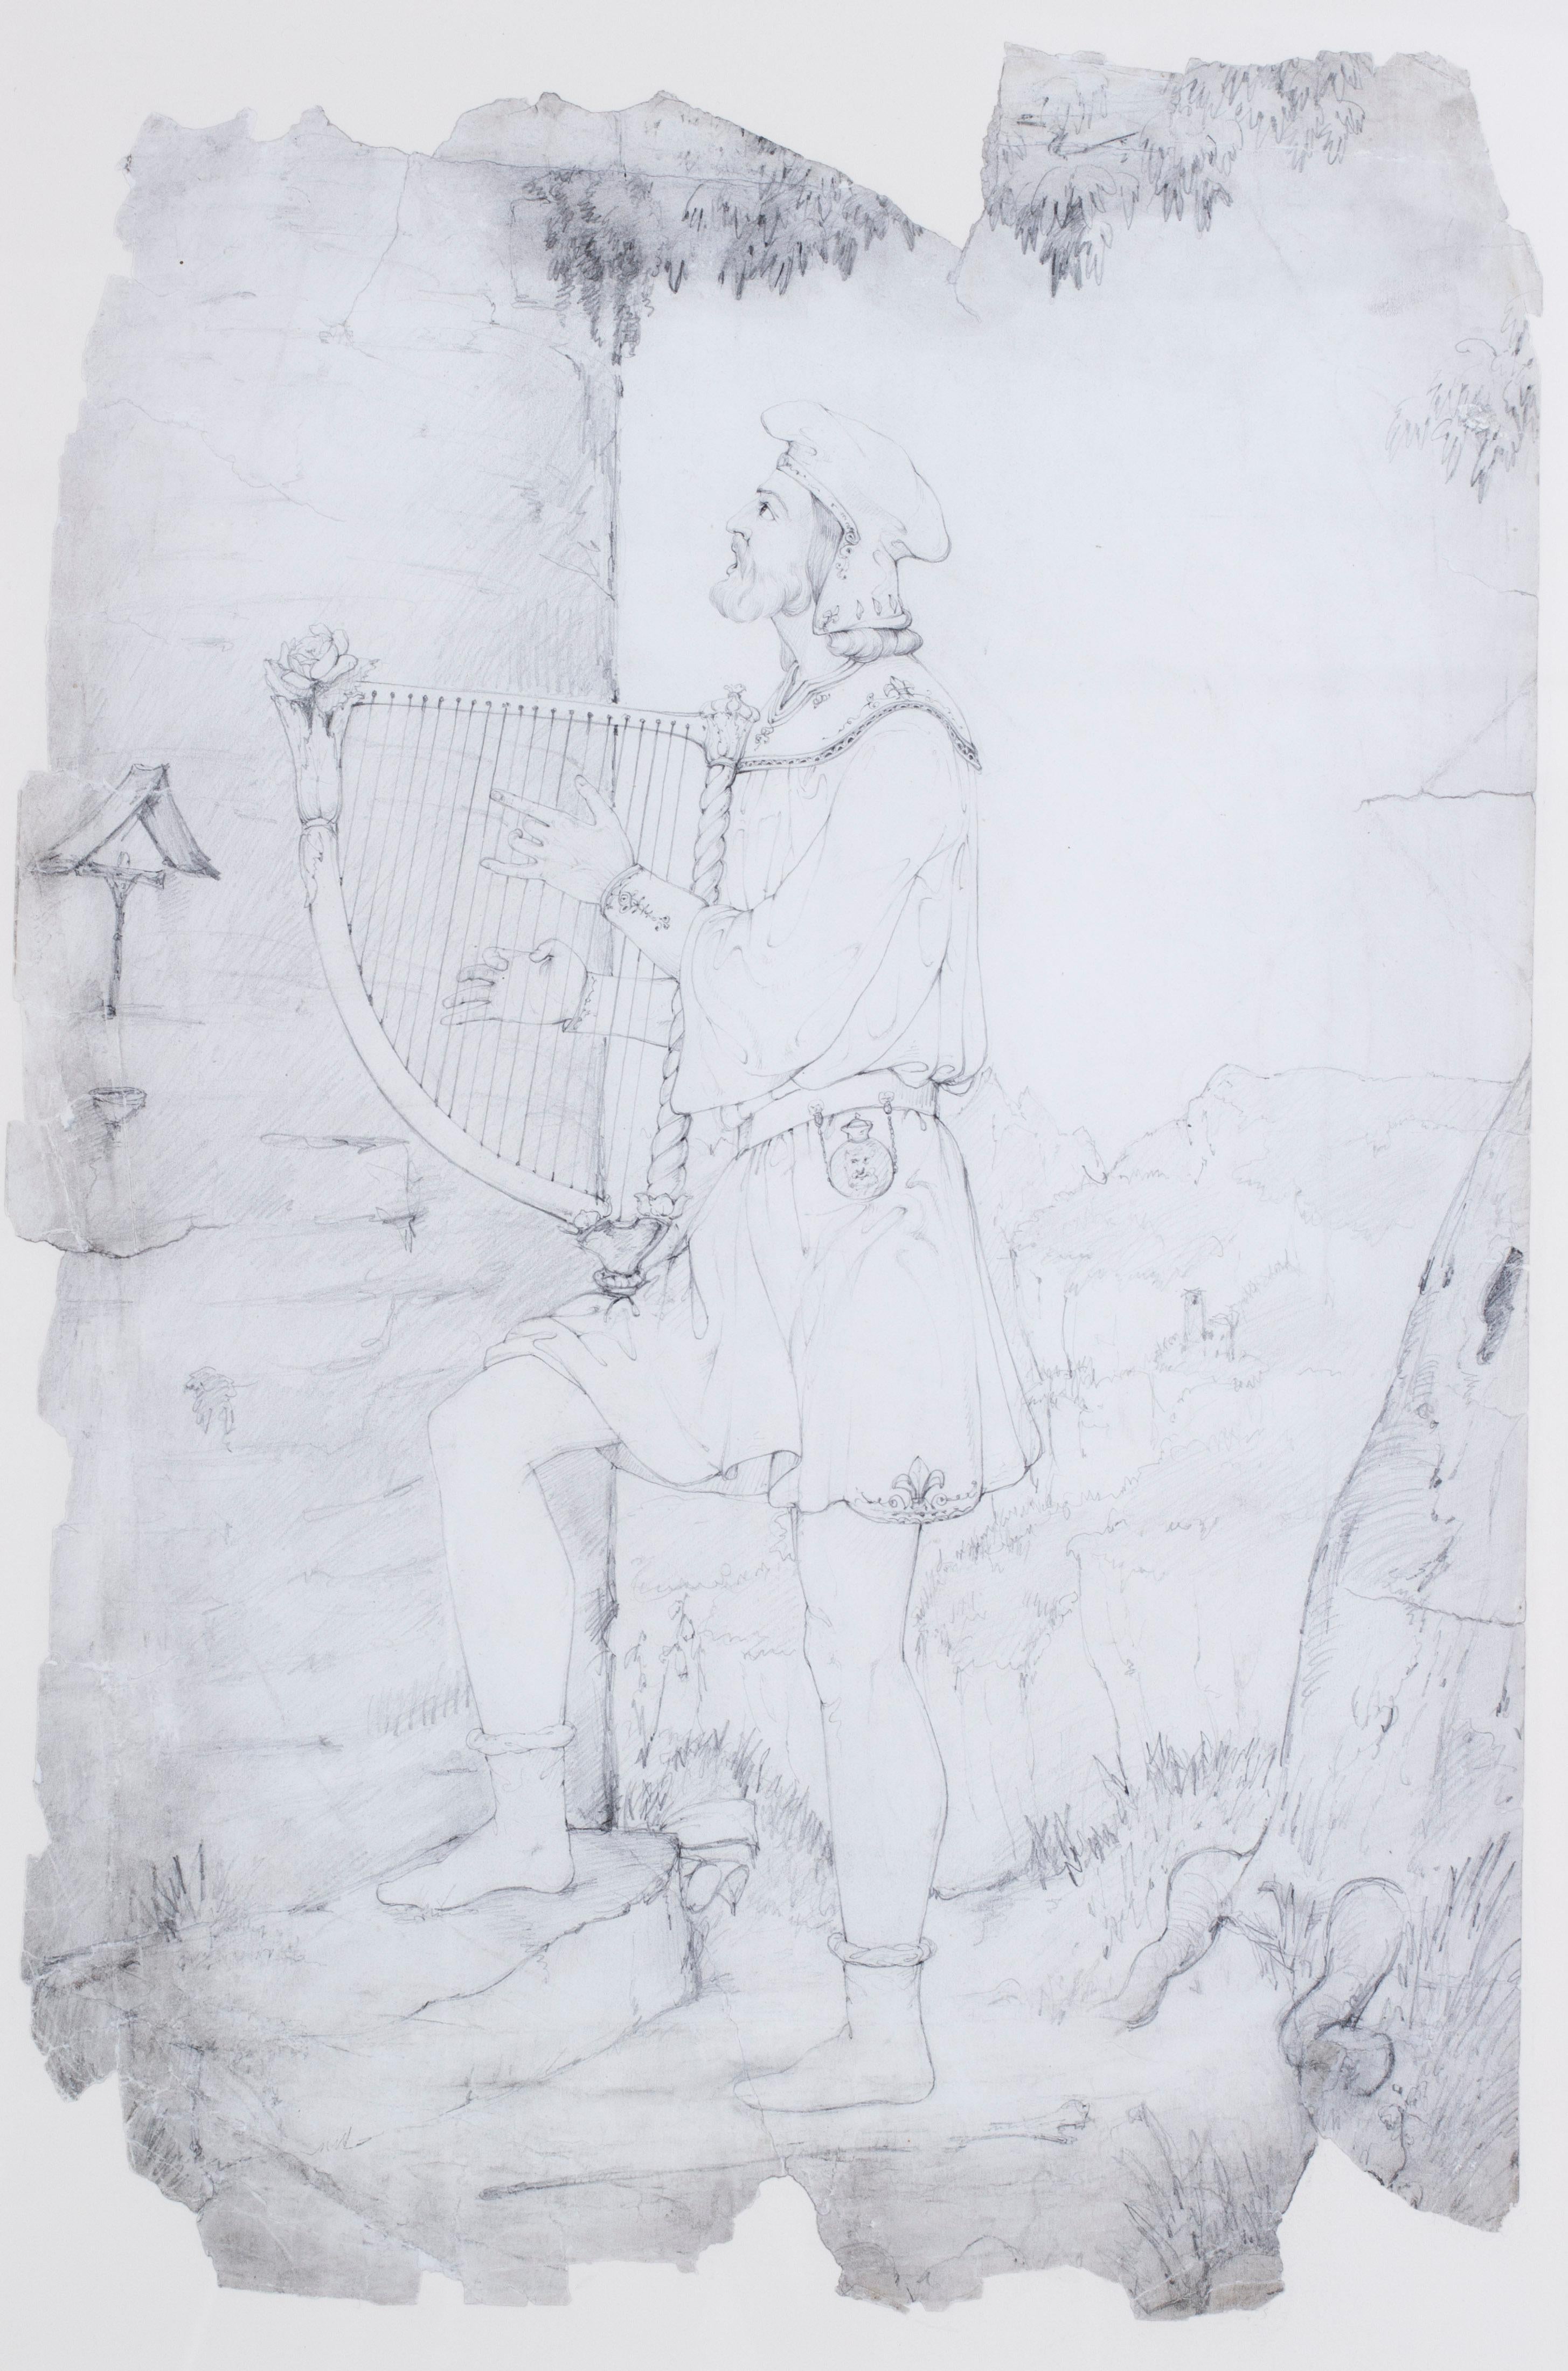 Lord Frederick Leighton (British, 1830-1896)
A very early study of a Medieval Minstrel
pencil on paper
the fragment measures approx. 19.1/2 x 13 in. 
(49.5 x 33 cm.) 
Provenance: Gifted by Leighton to his cousin Edith Emily Jellicorse, nee Garnham,